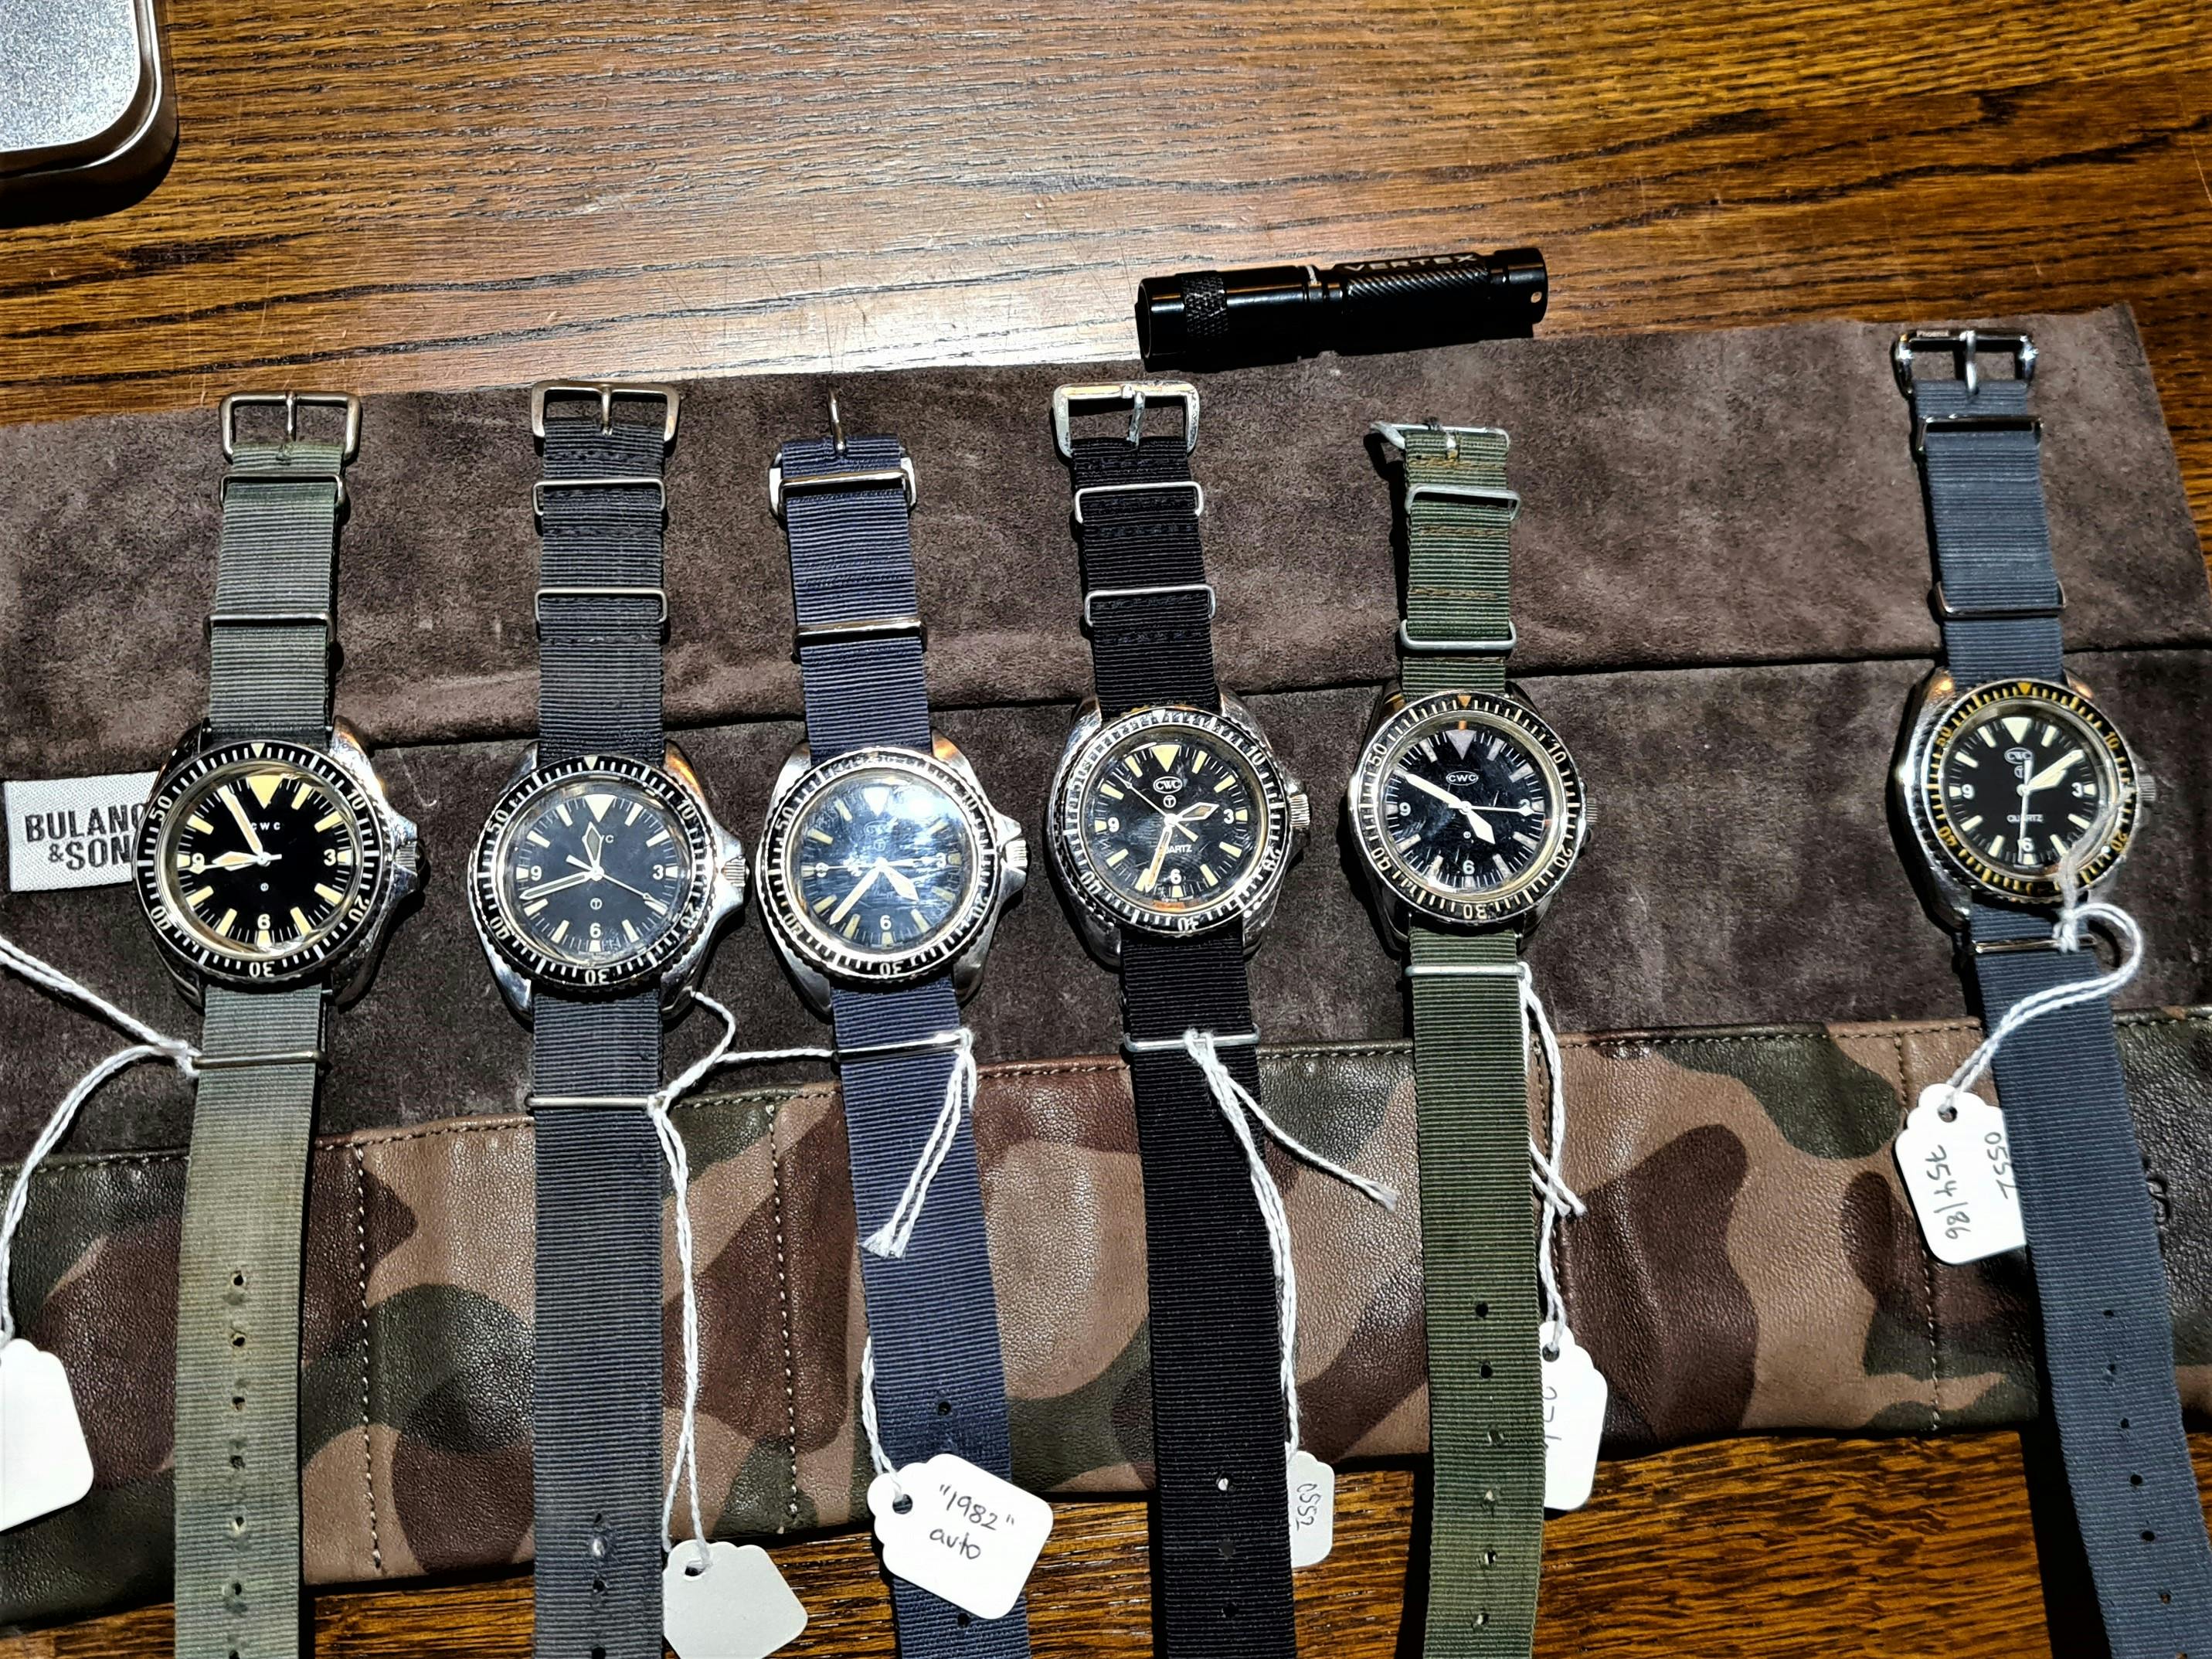 A Group of Military Watches brought along to a Watch Club event. You definitely would NOT get anything like this from a sales-type Watch Club